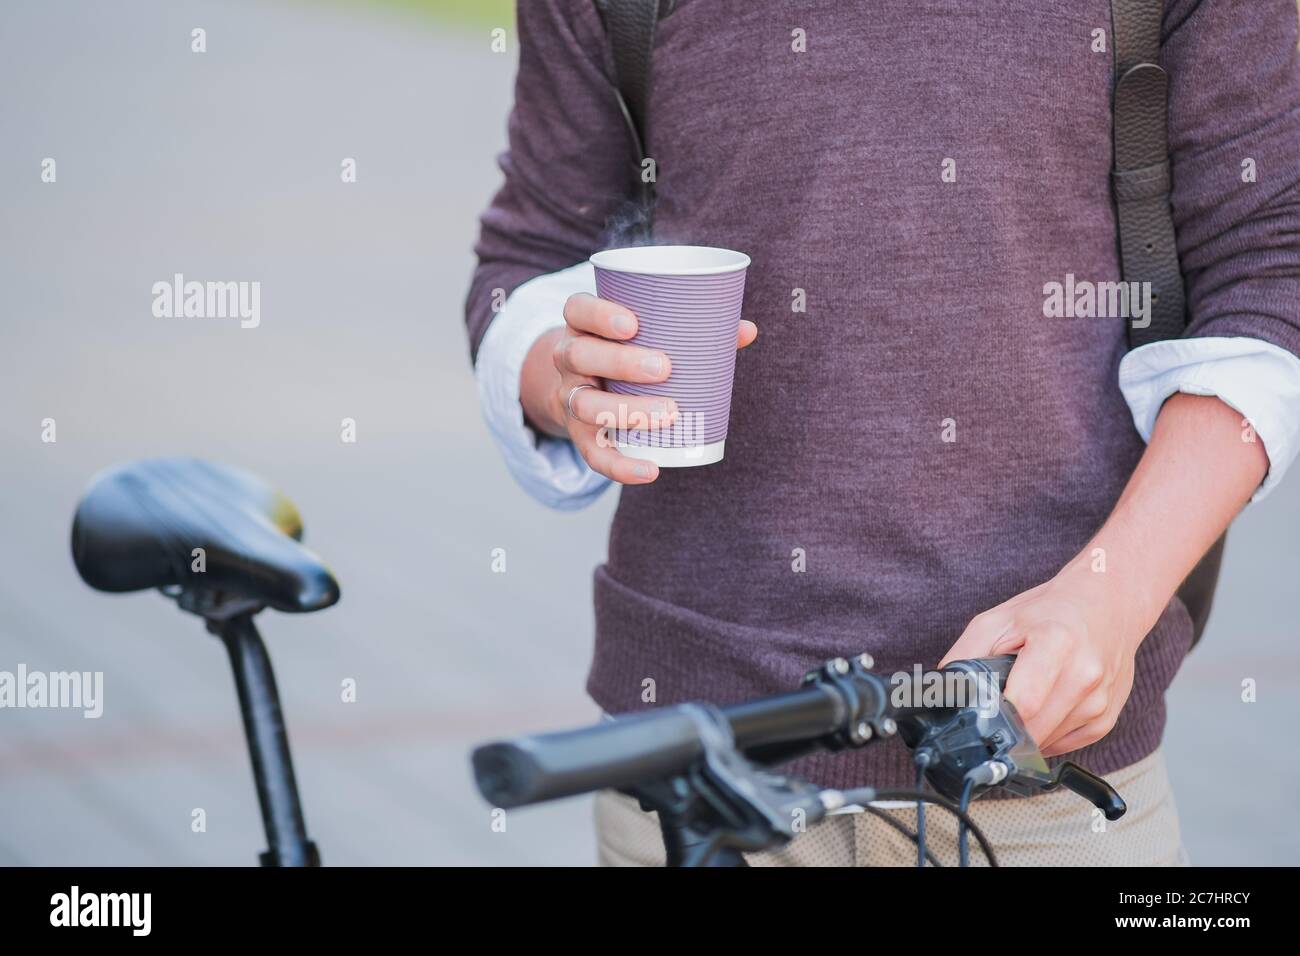 Cup of hot coffee in hands of a bicycle commuter. Going to work by bike, active urban lifestyle concept Stock Photo